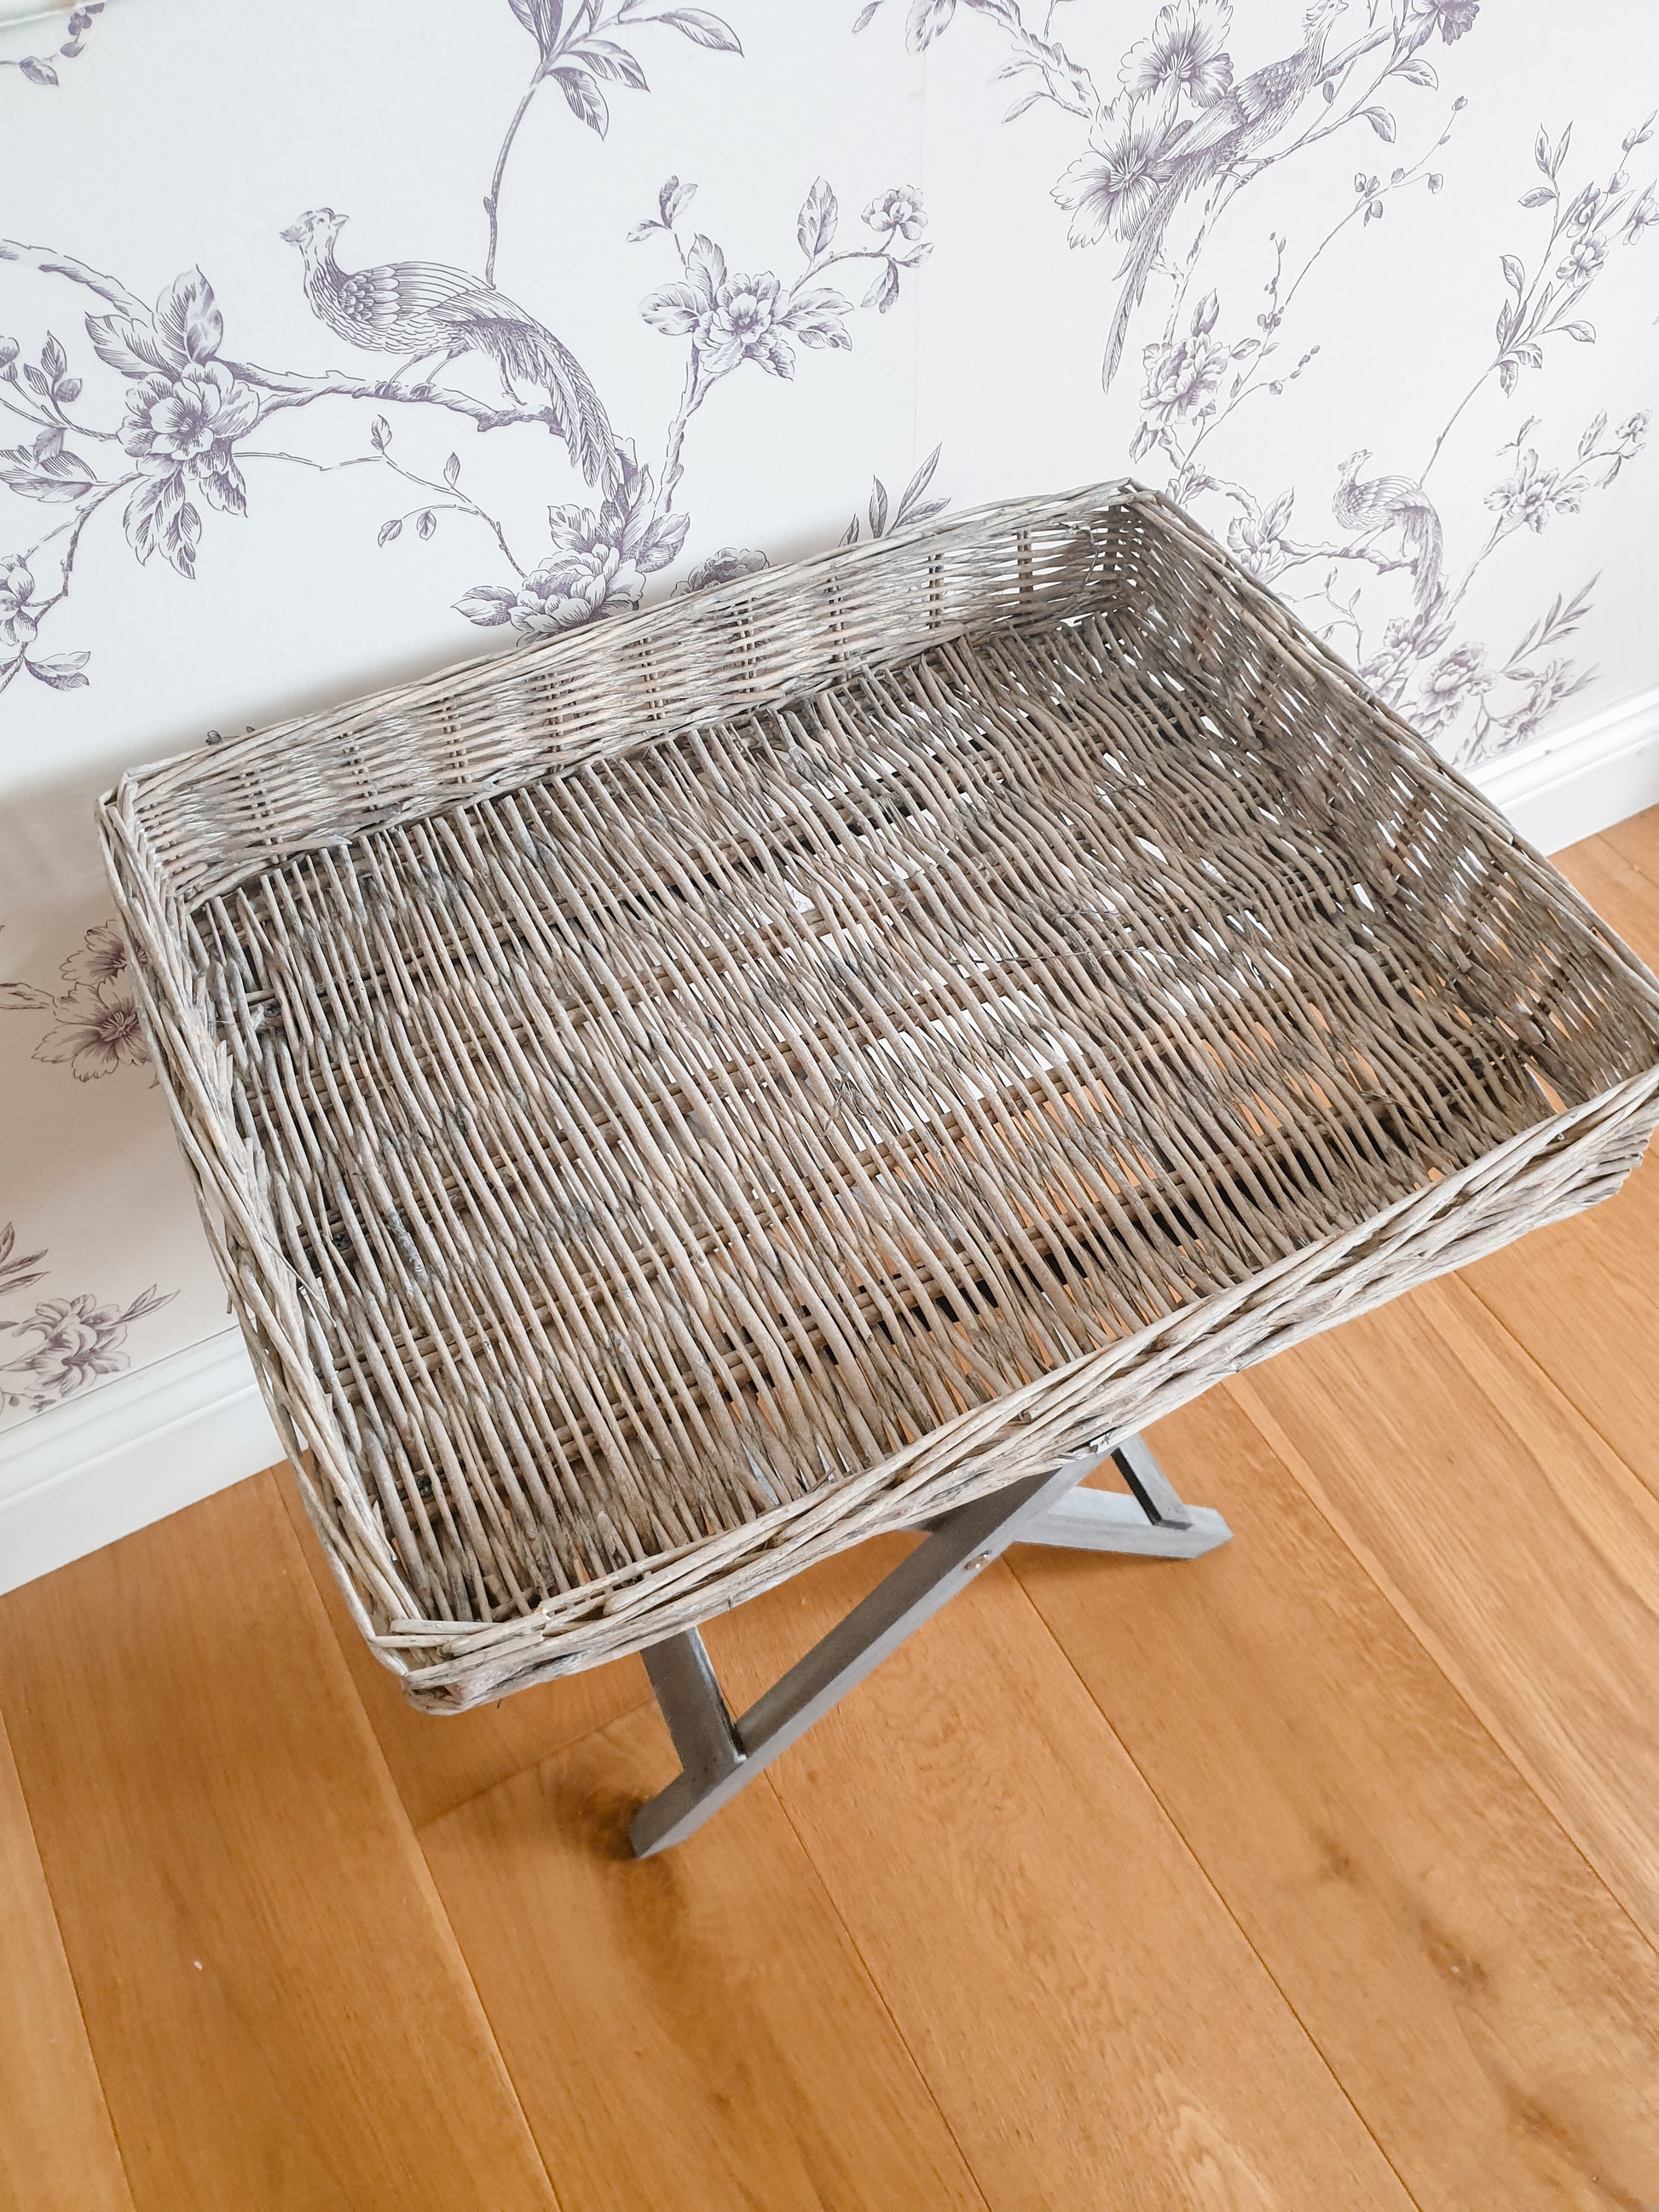 Folding wicker tray table. Perfect home accessory for country & cottage interiors. Butler style tray with folding legs mean this portable tray table is perfect for small sapces, adding to a sofa end or using as a temporary bedside table. Handmade rustic finish in grey.